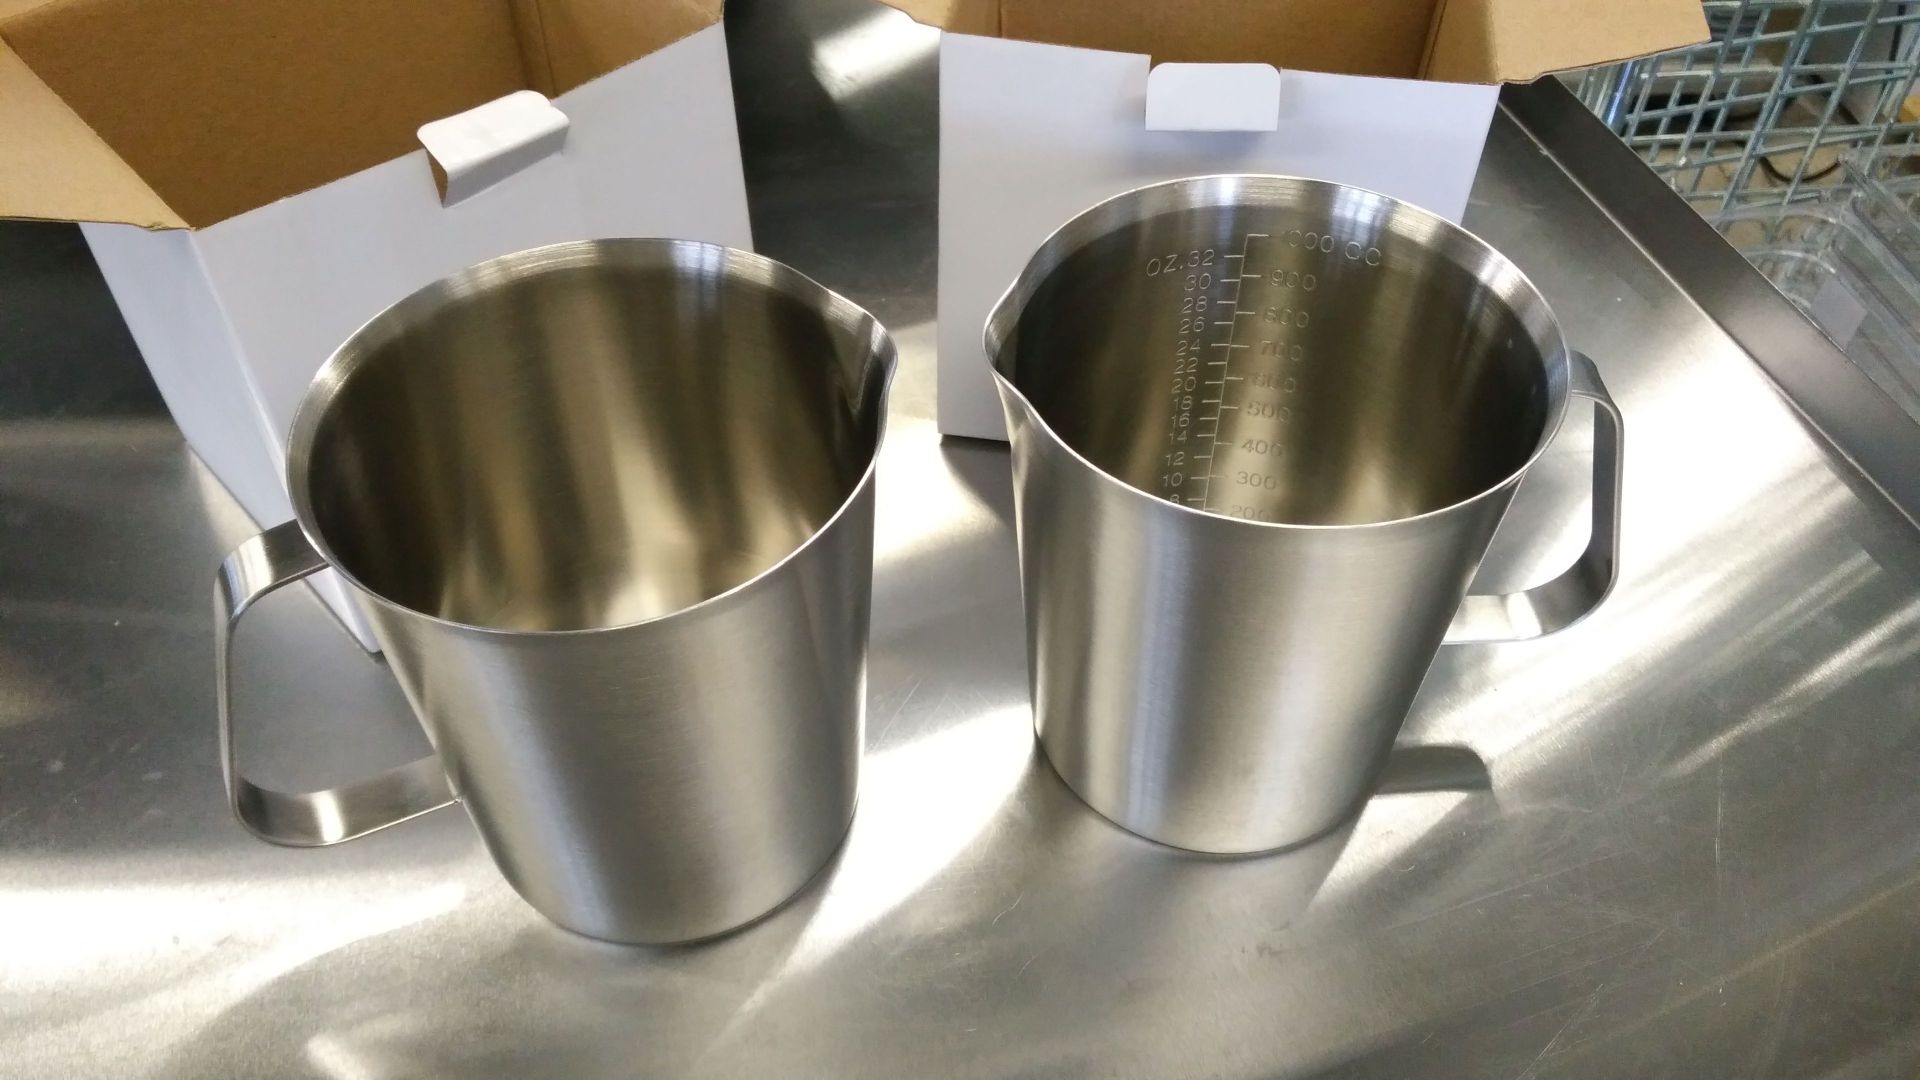 1000ml Heavy Duty Stainless Measures - Lot of 2